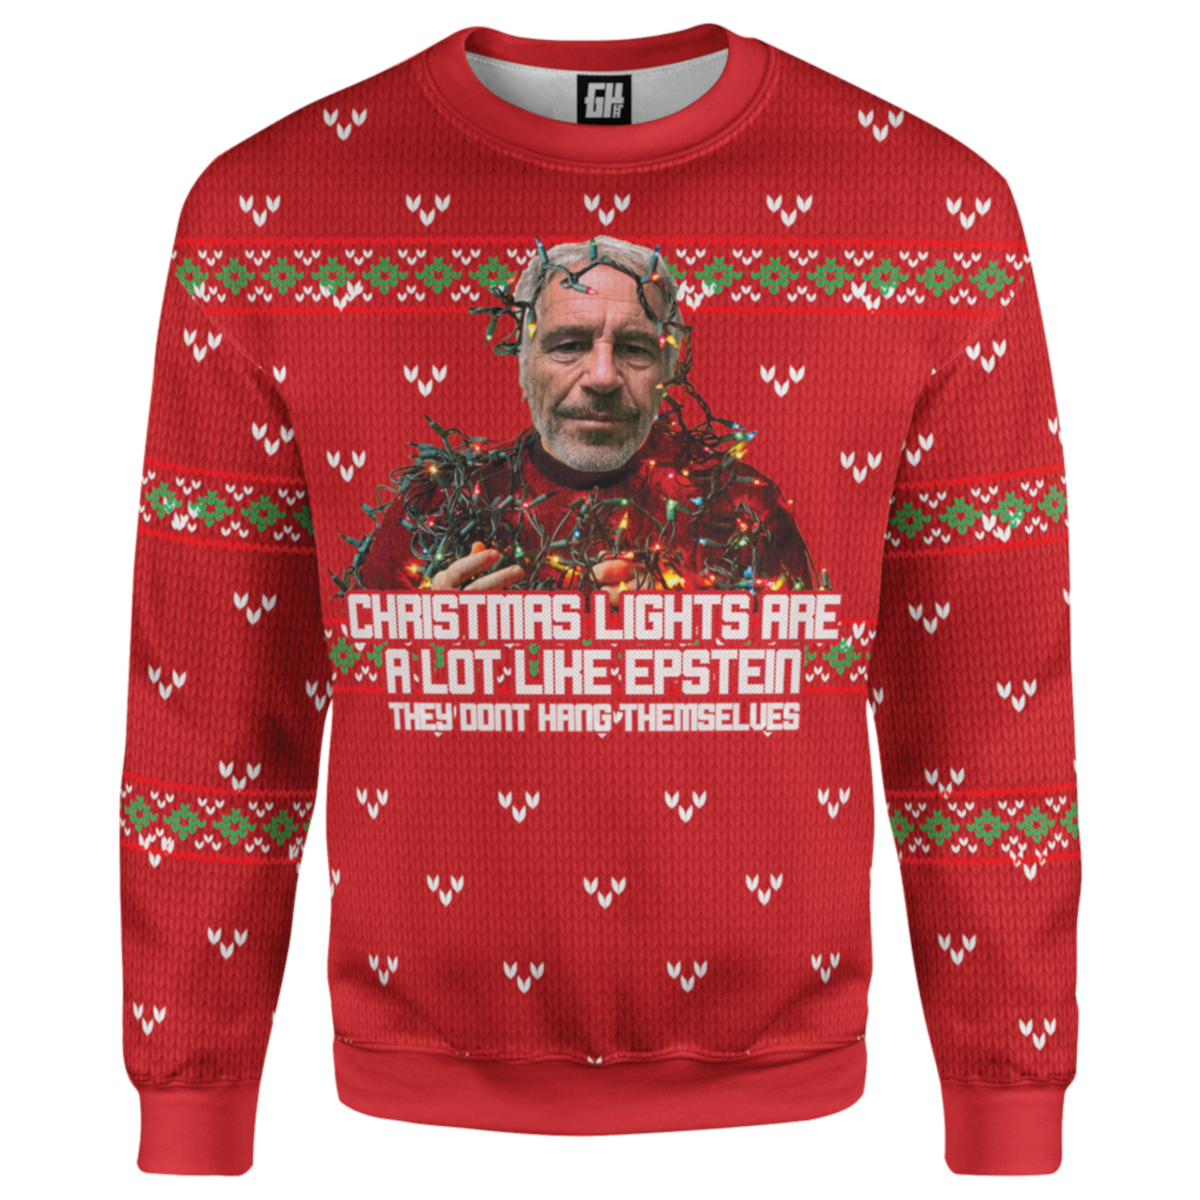 They Ain't Gonna Hang Christmas Sweater